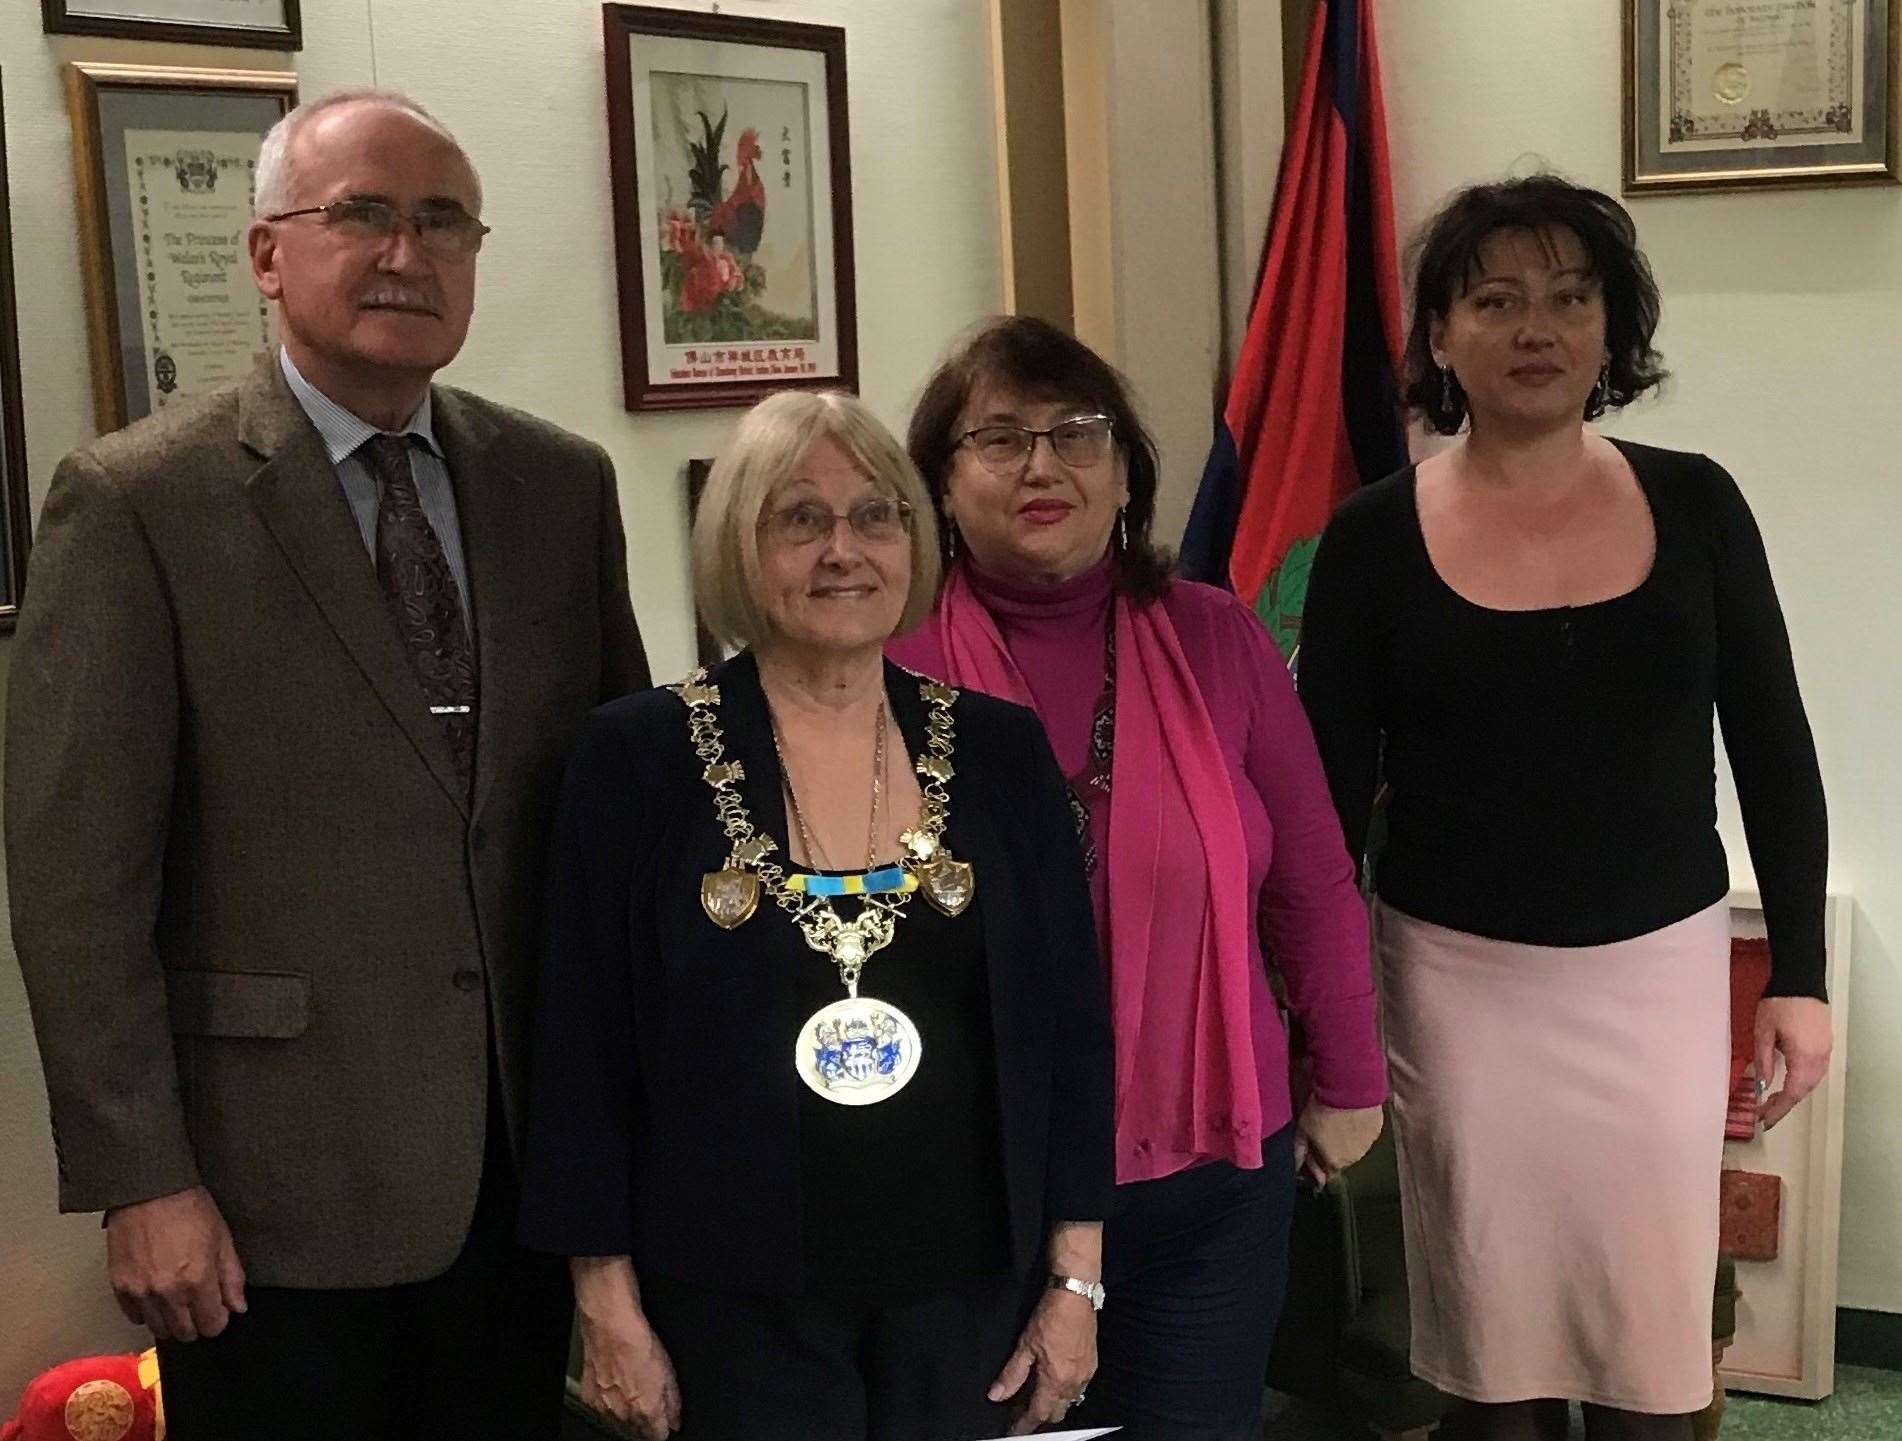 Volodymyr, his wife Luybov, and daughter Iryna meeting the Mayor of Medway Cllr Jan Aldous at Medway Council’s headquarters in Chatham